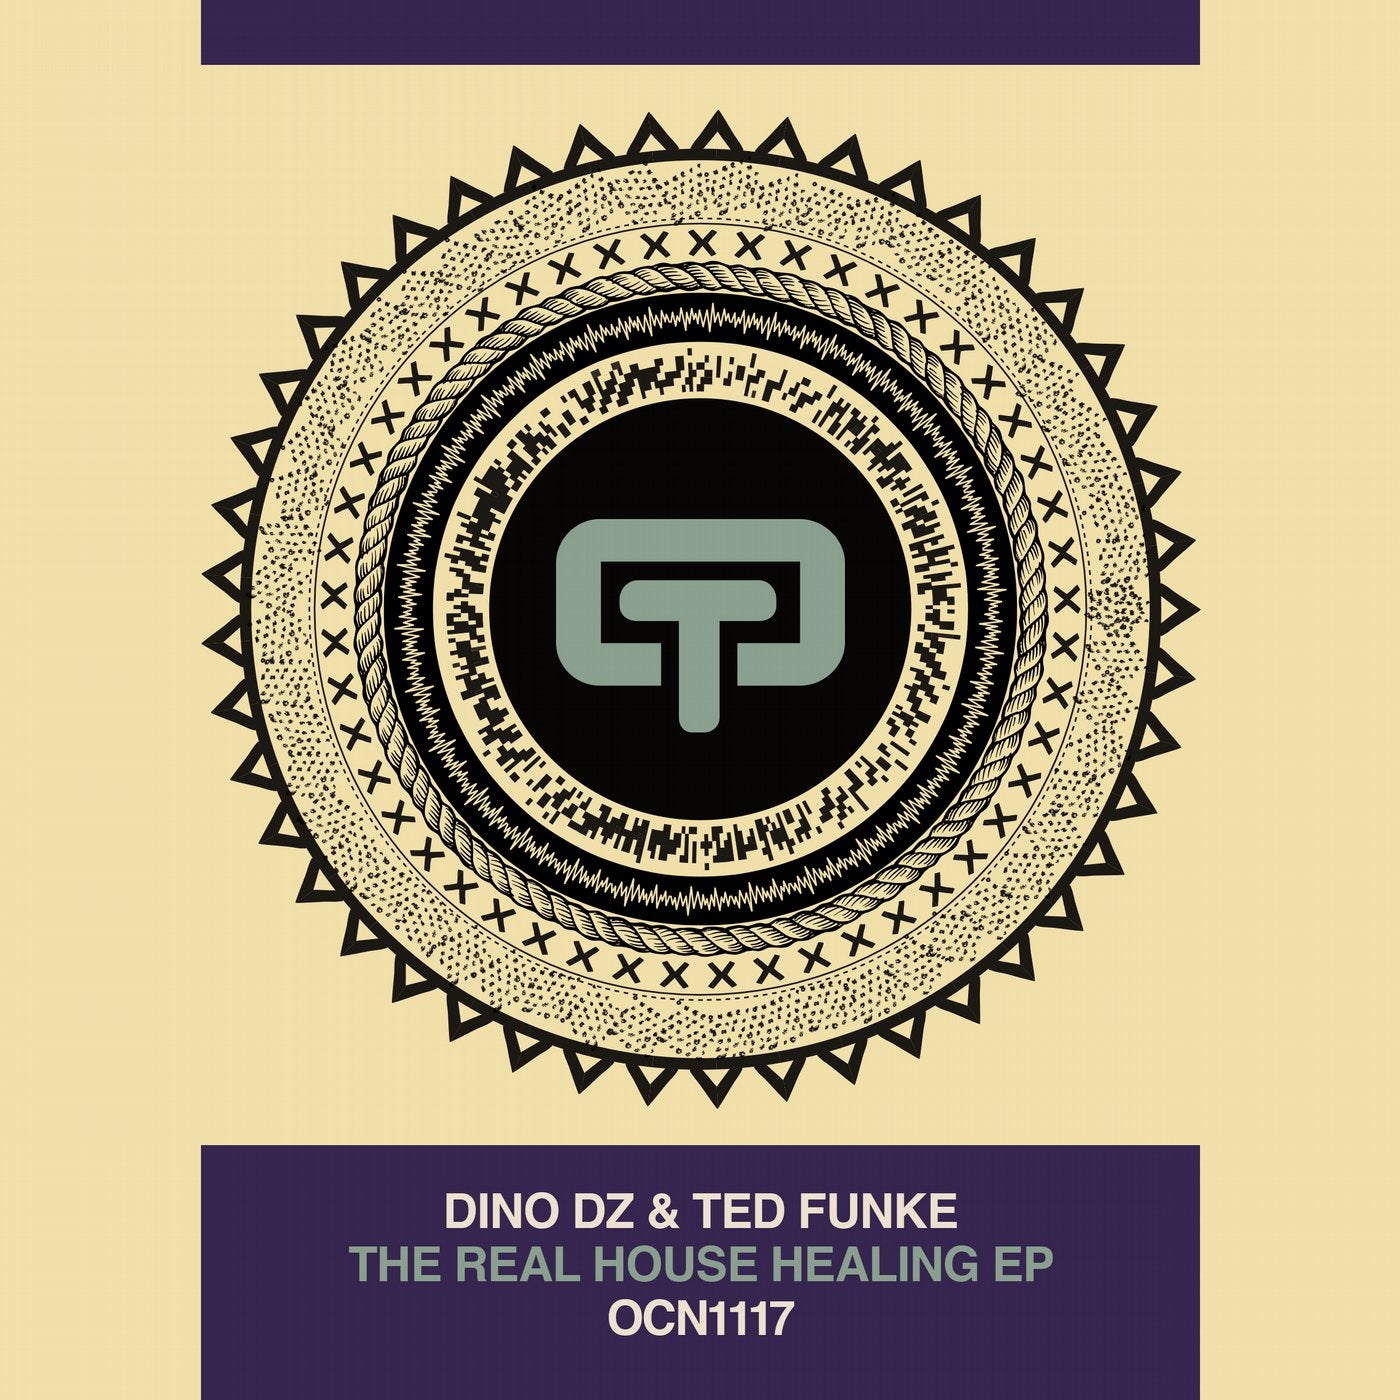 The Real House Healing EP